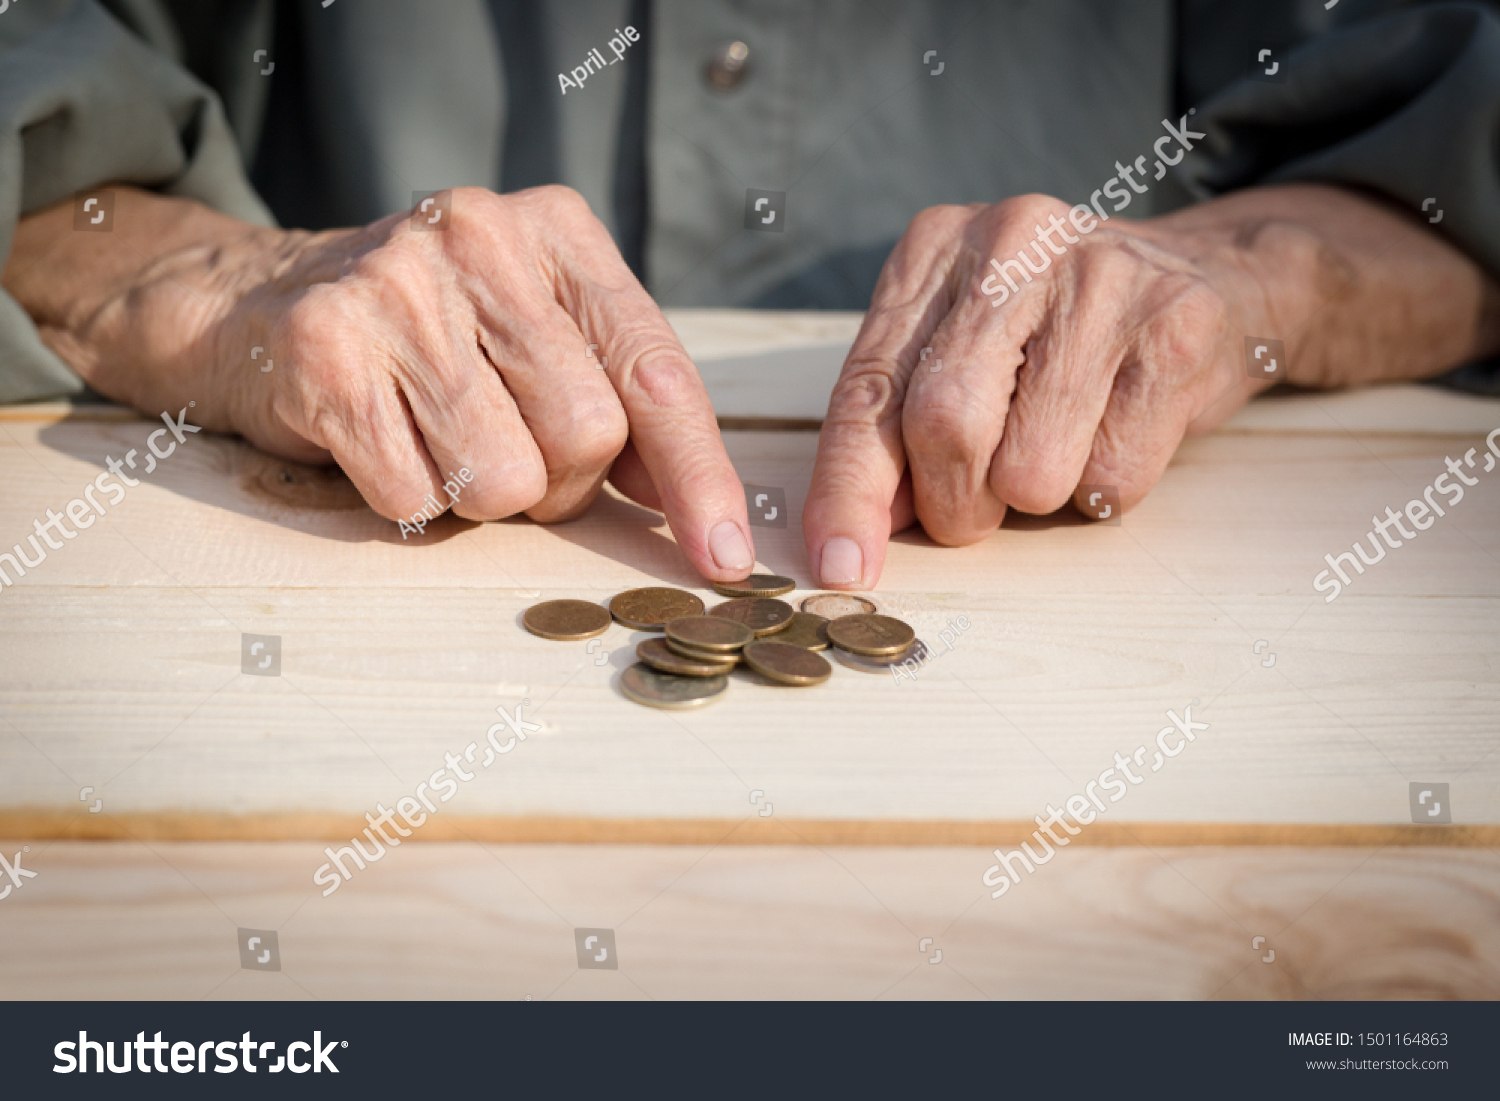 Hands of an elderly man holding coins. The concept of lack of money, the poor, the small pension of old people. Image. #1501164863